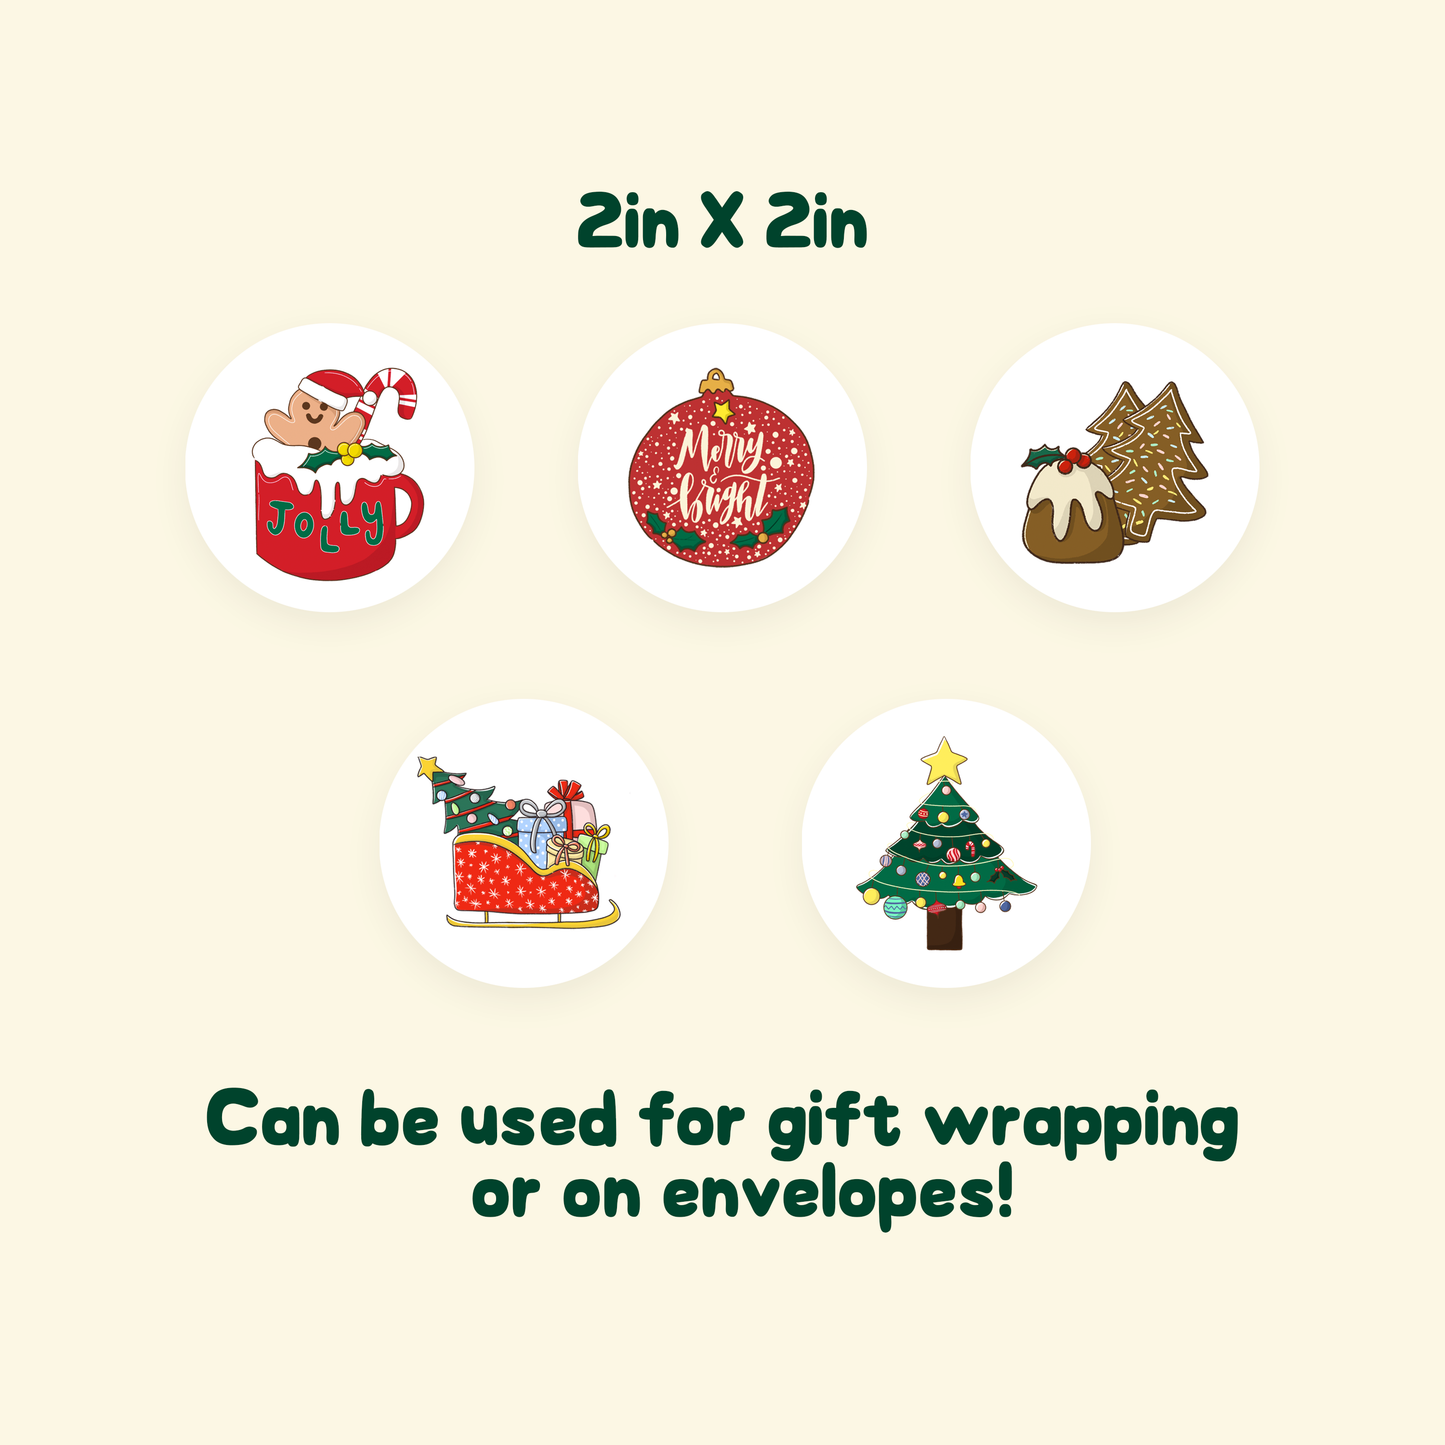 Christmas gift wrapping / envelope sealing stickers